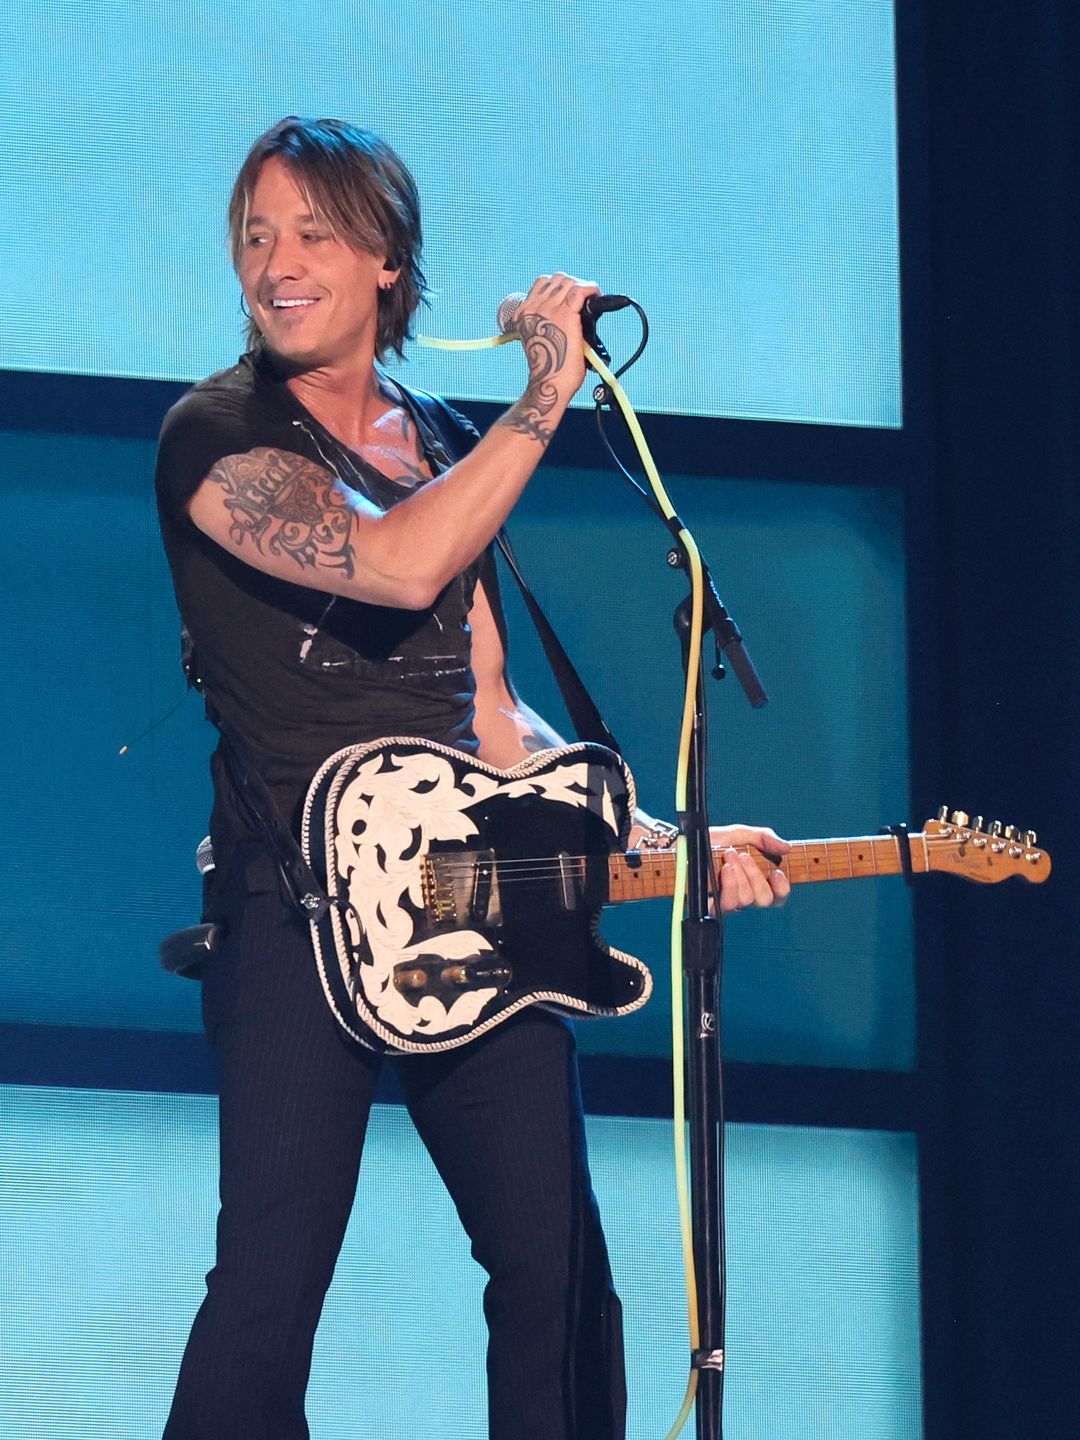 Keith performing with a guitar at the ACM Awards